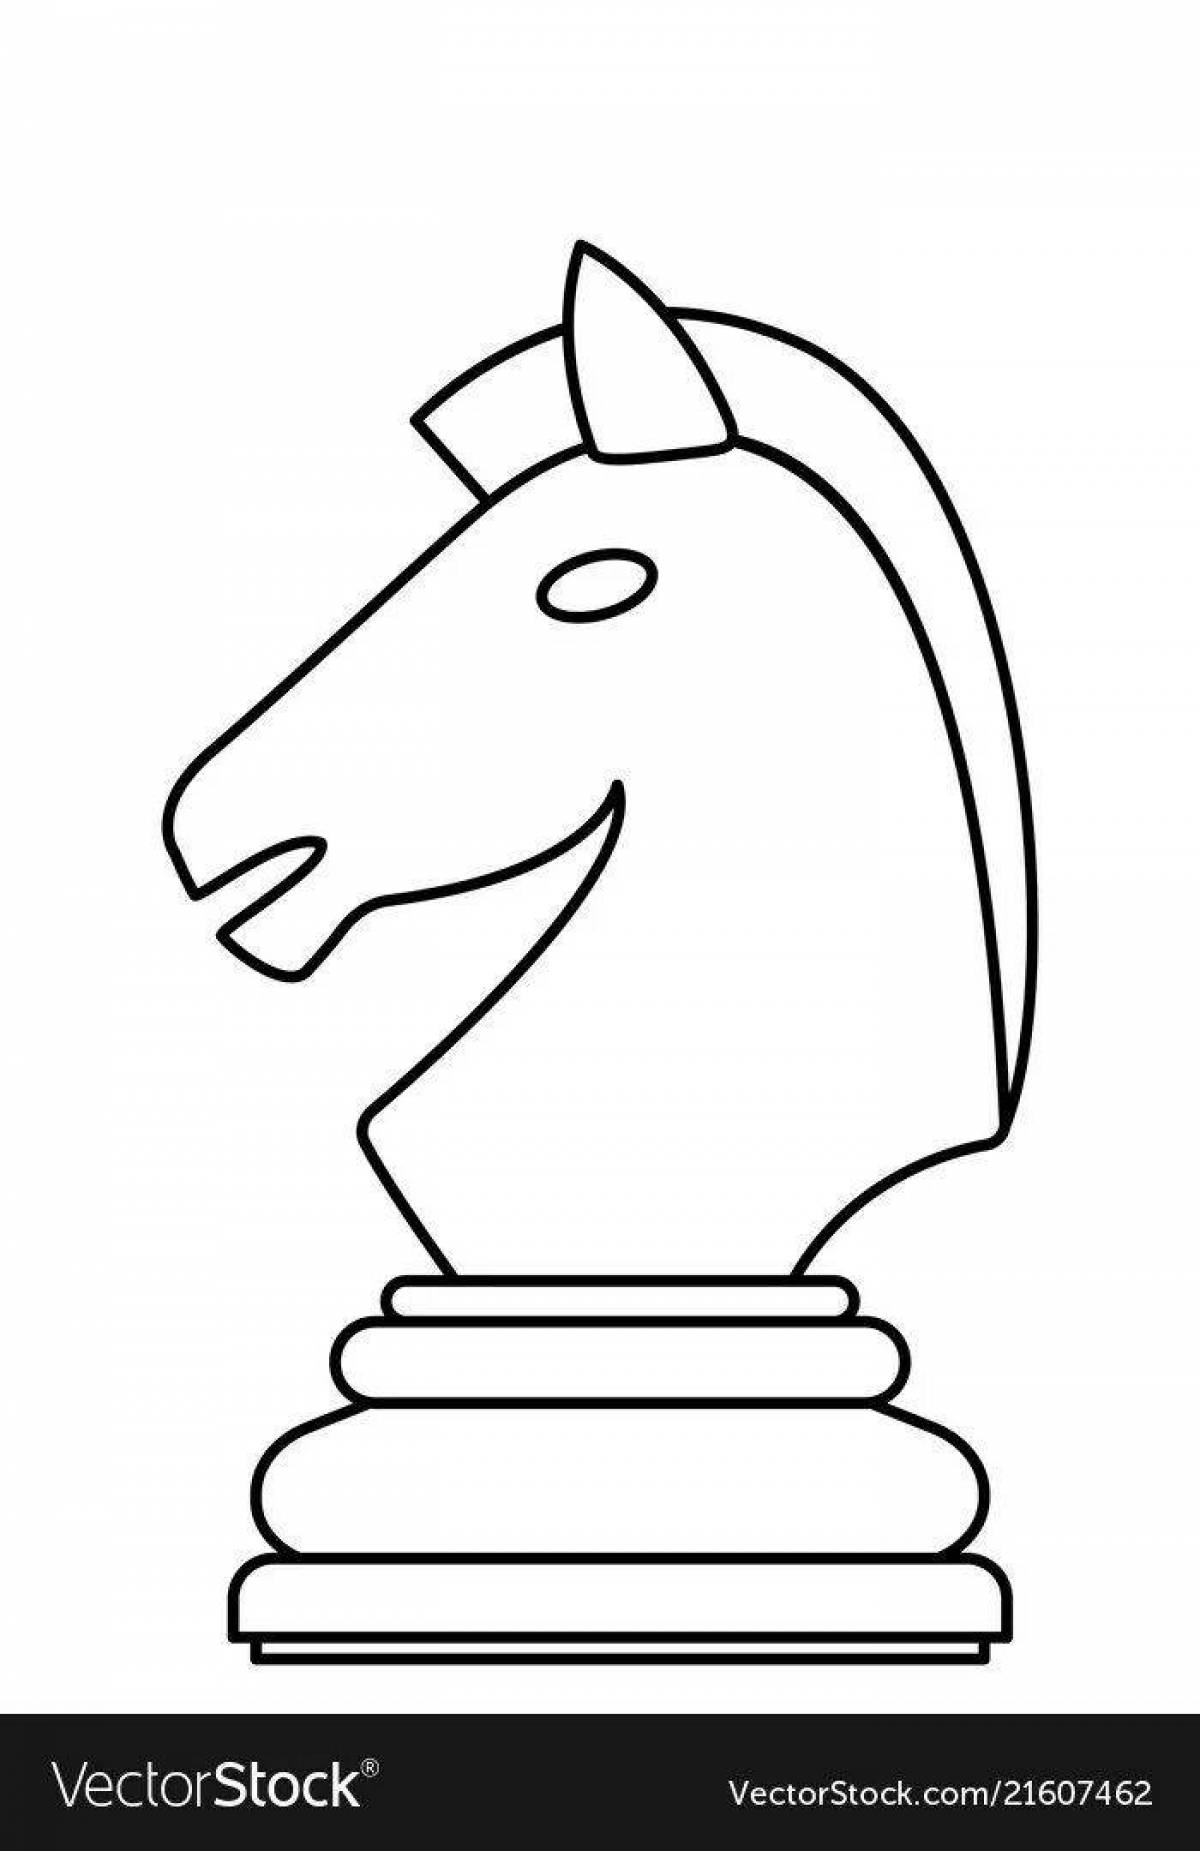 Coloring page awesome chess knight